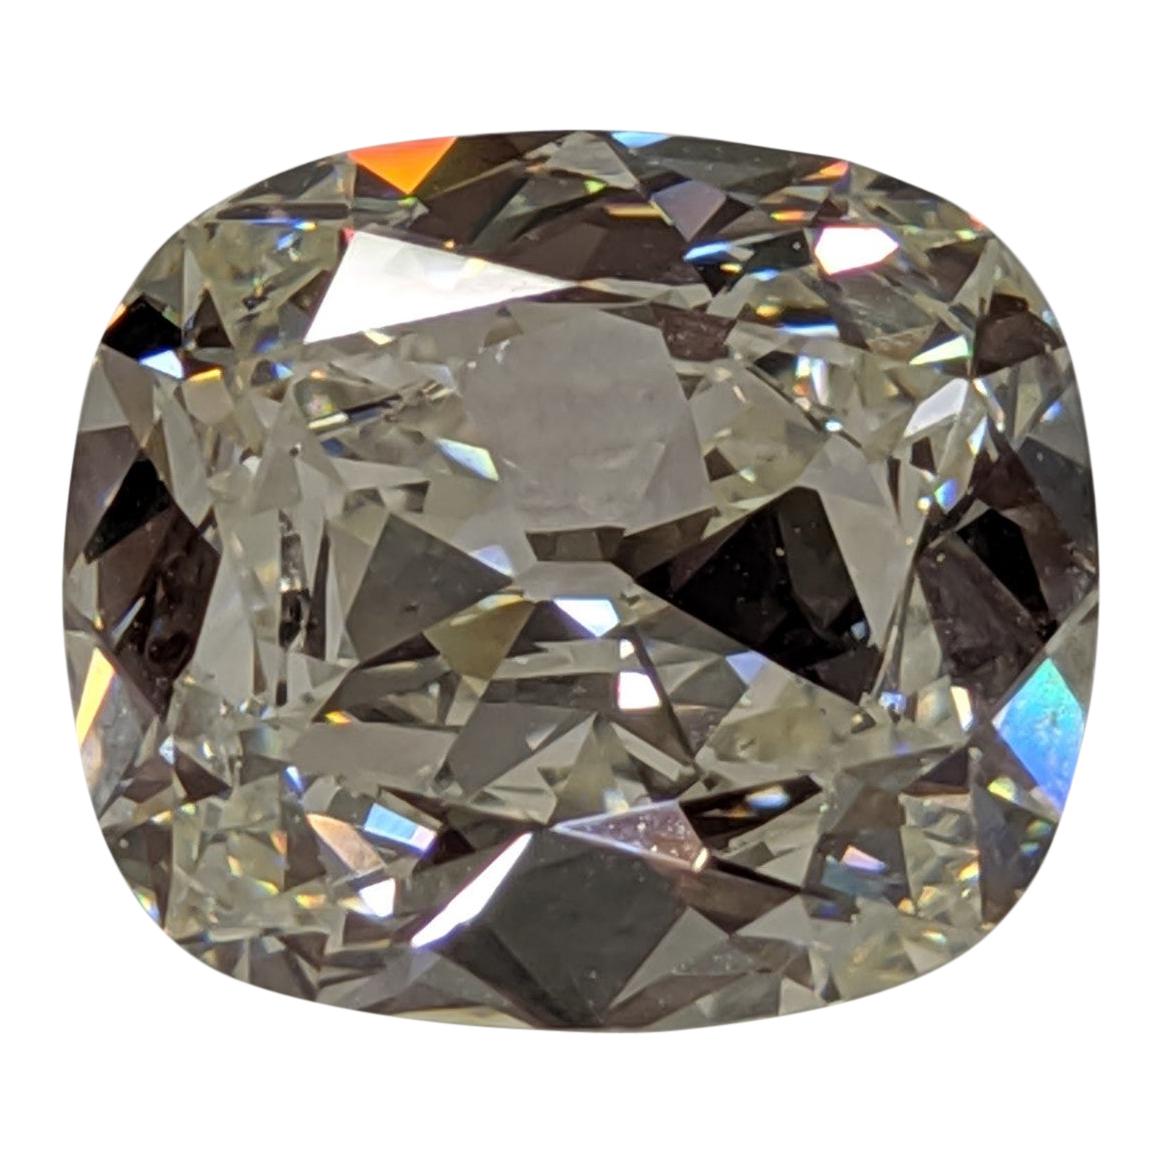 This astoundingly beautiful Cushion Cut diamond by Jack Reiss is photographed unmounted and in a temporary frame awaiting your desire to create a spectacular piece of important jewelry. The GIA Report is included for this 7.29 carat  carat I color